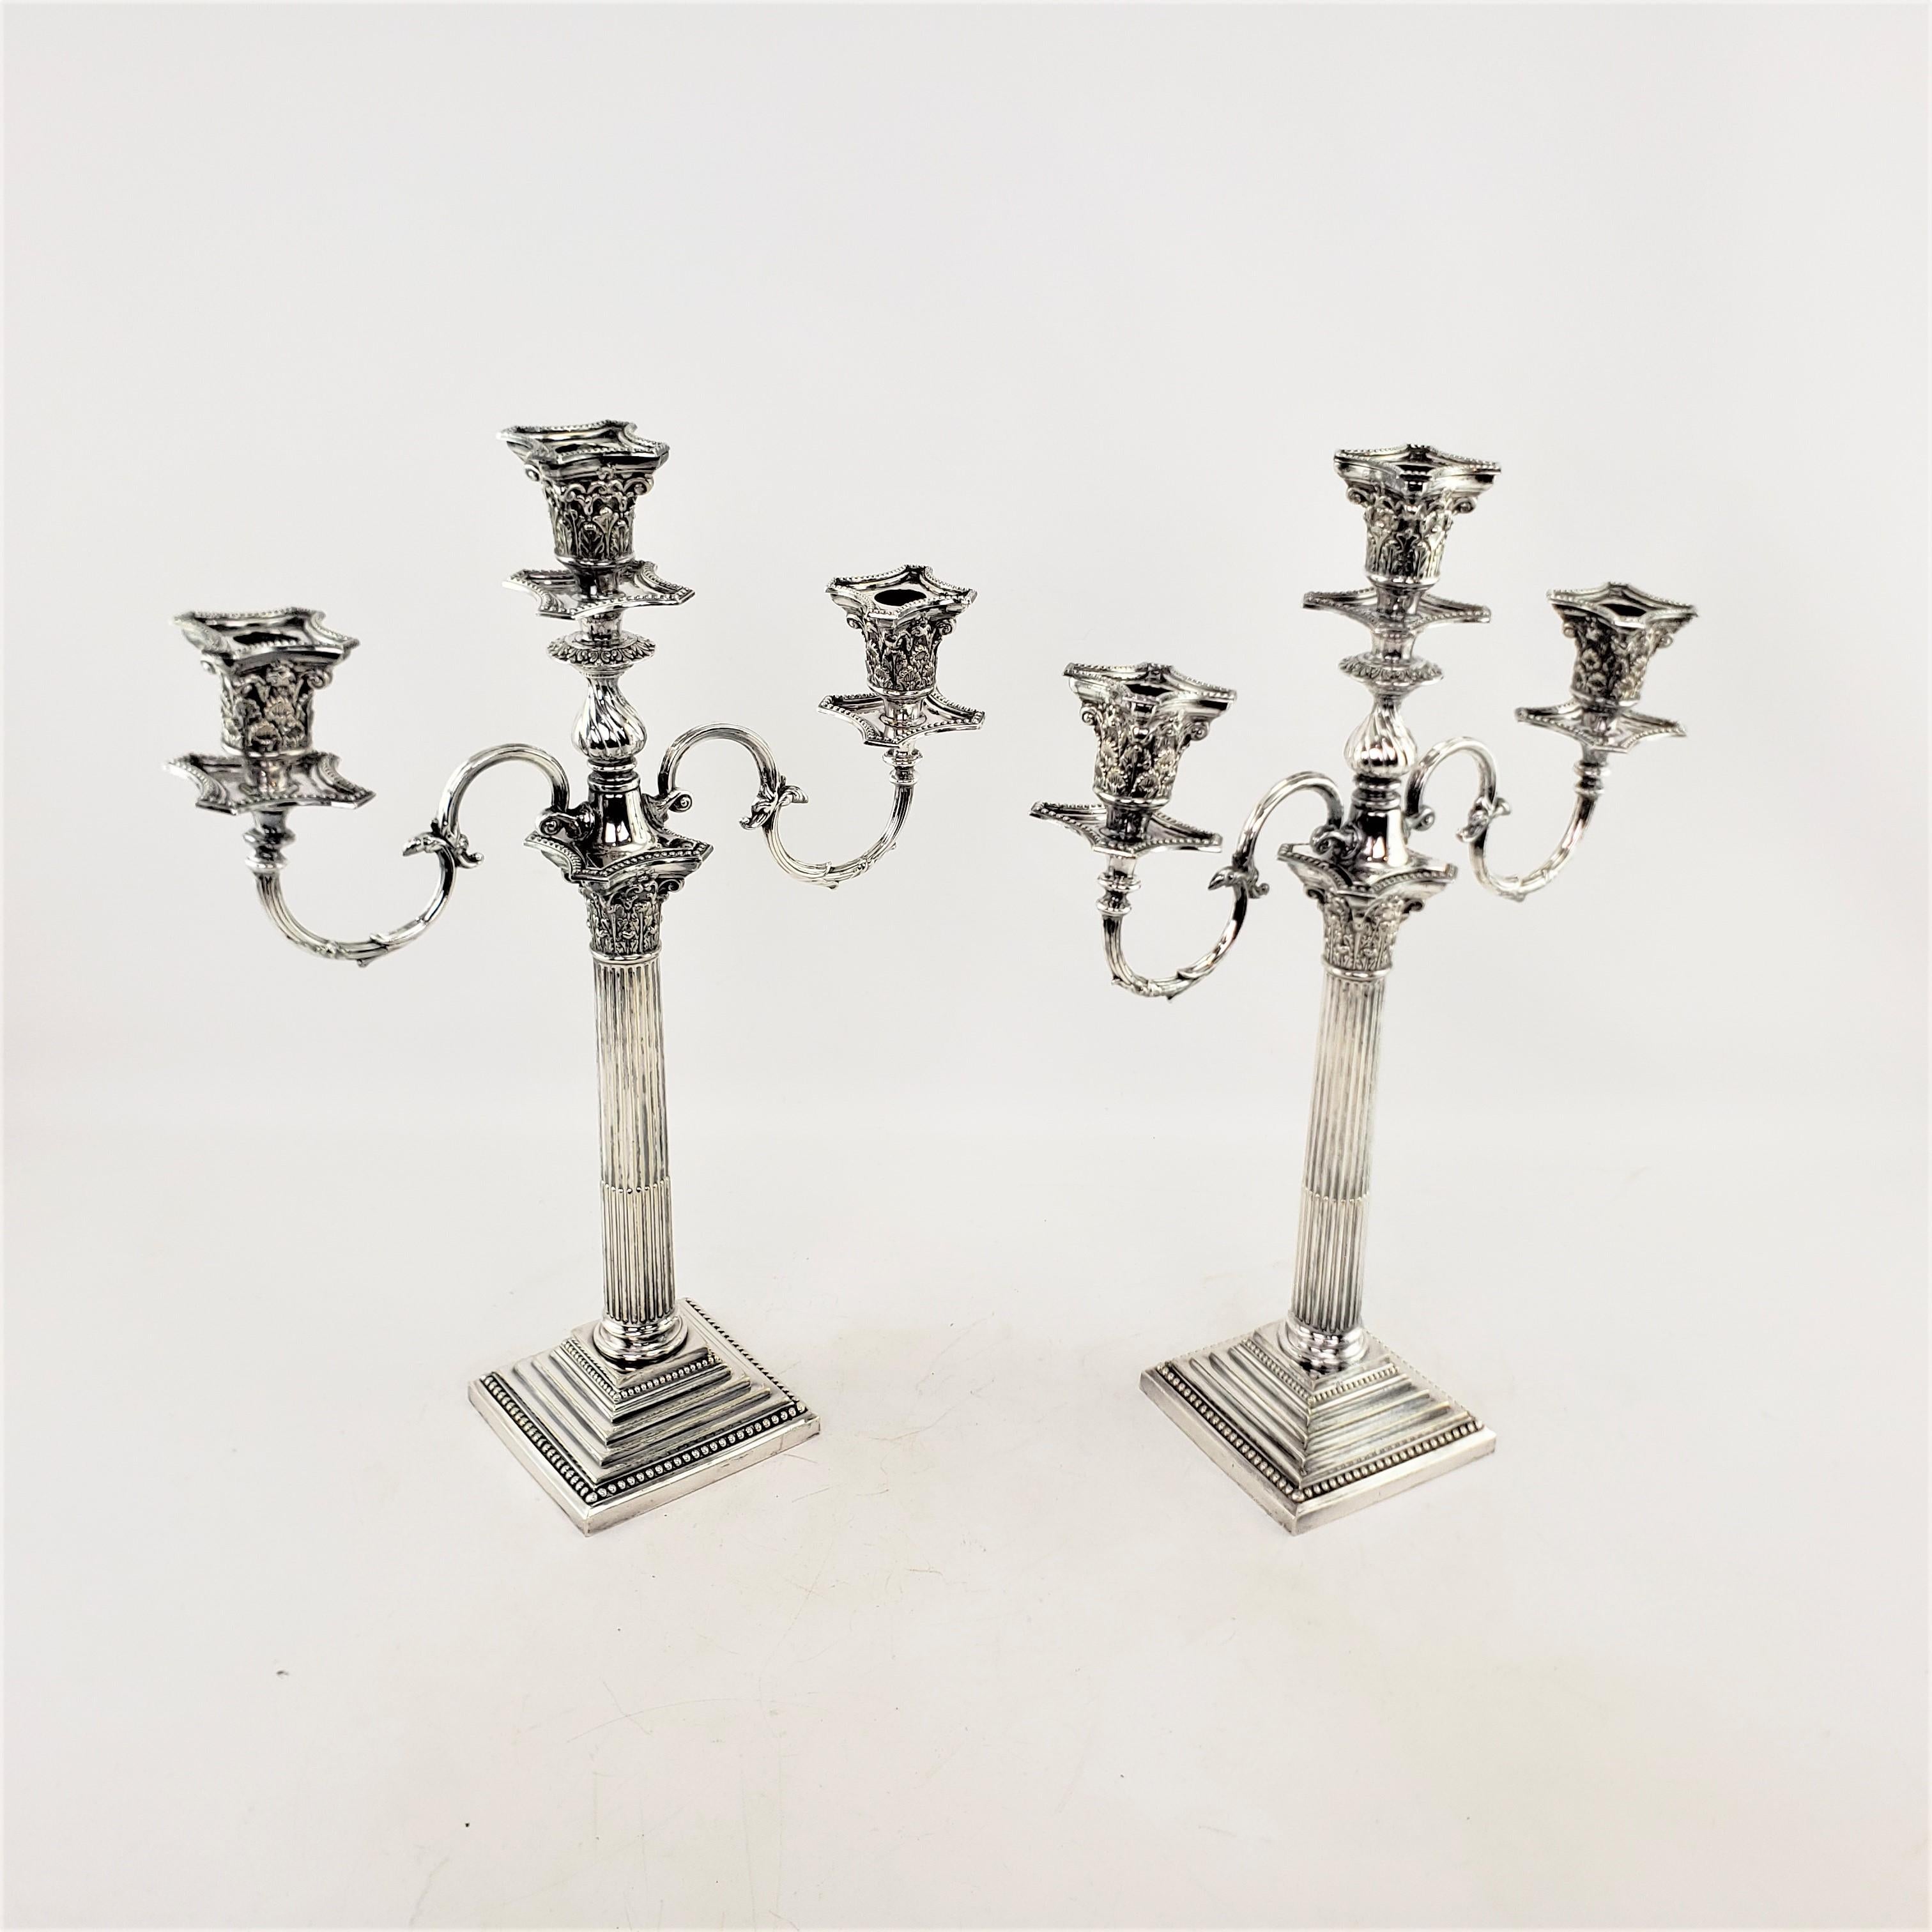 Pair of Antique Mappin & Webb Convertible Candelabras in Corinthian Column Style For Sale 2